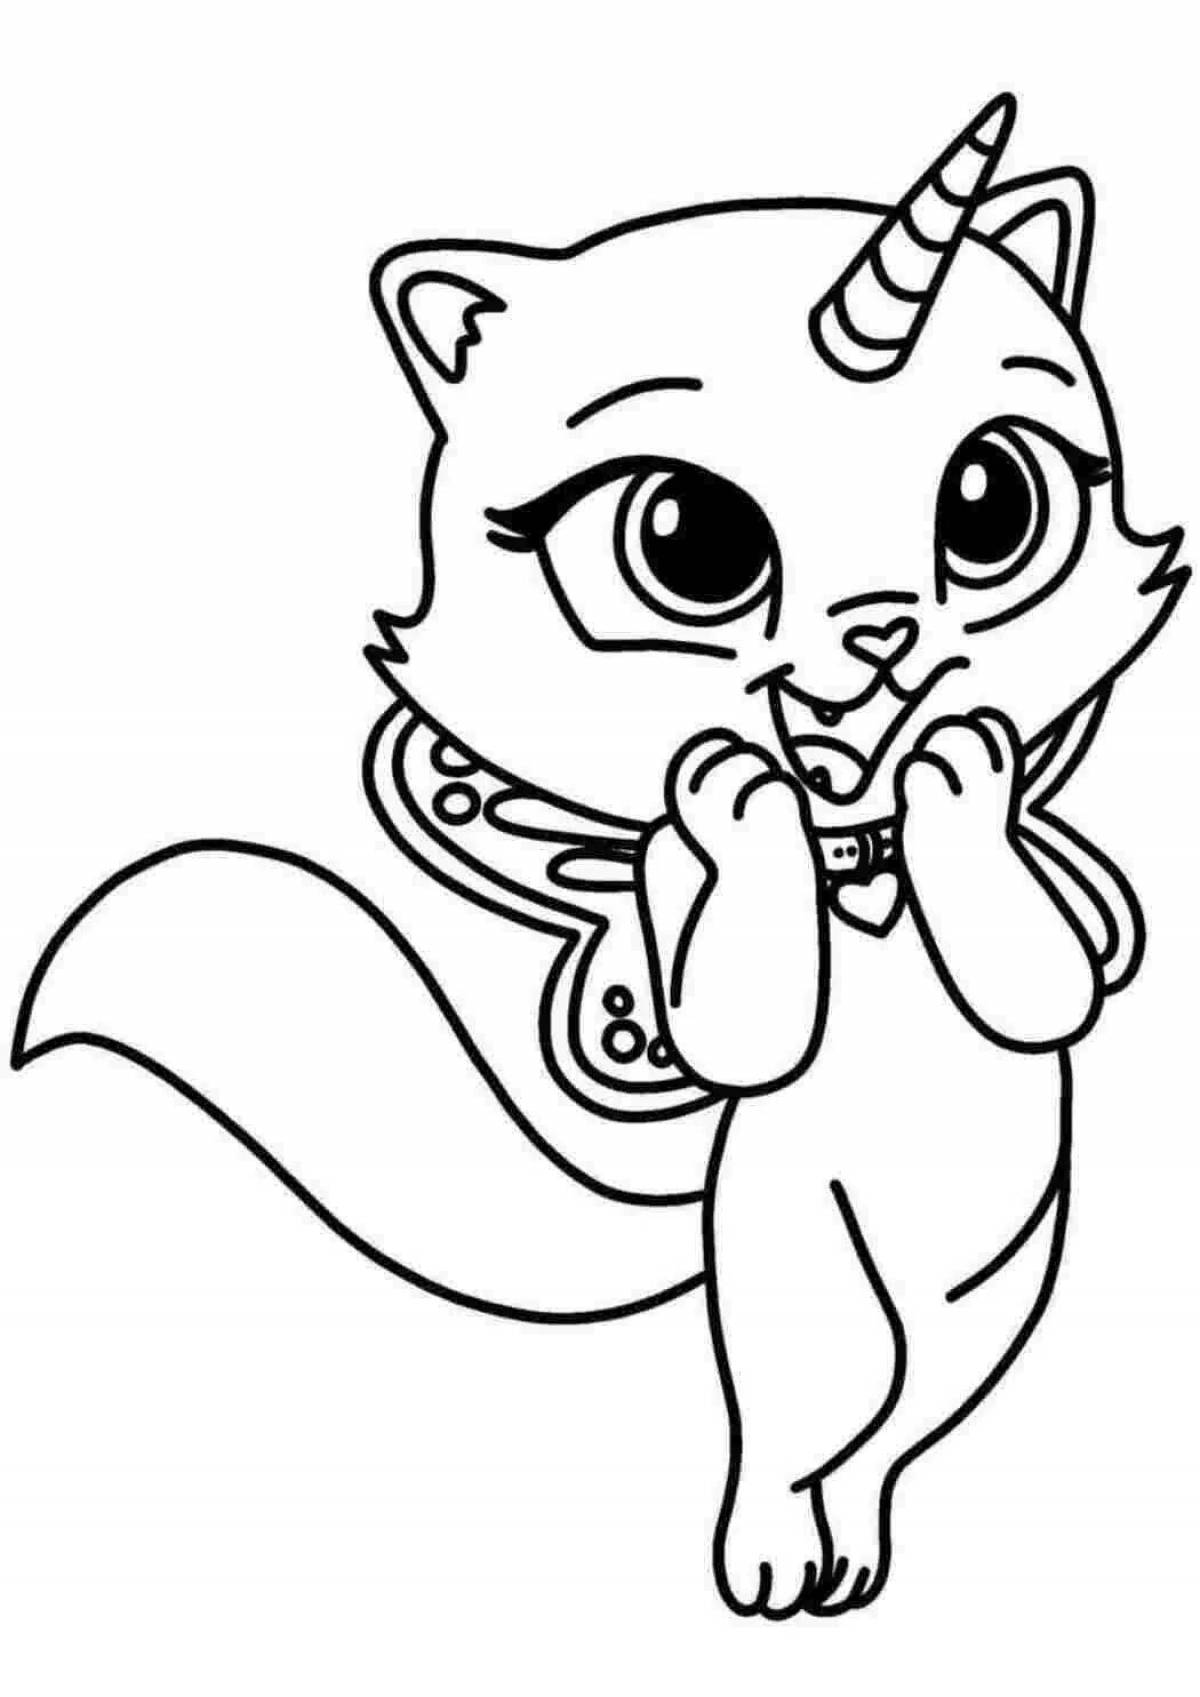 Bright mrr meow coloring